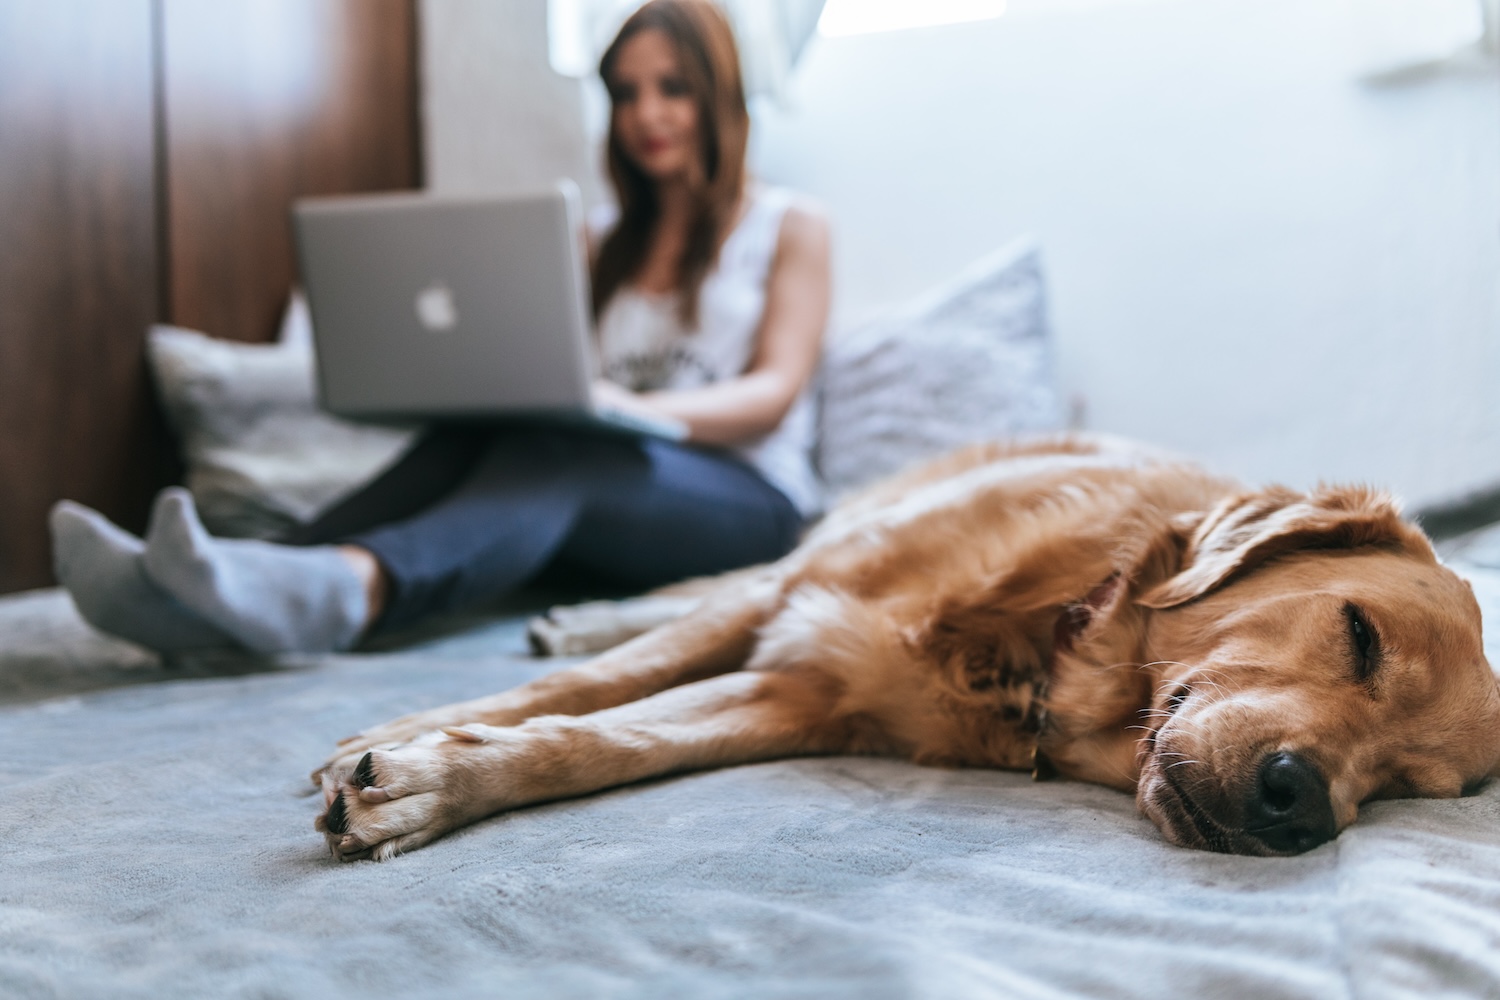 Woman Browses a Laptop While Her Dog Rests Nearby